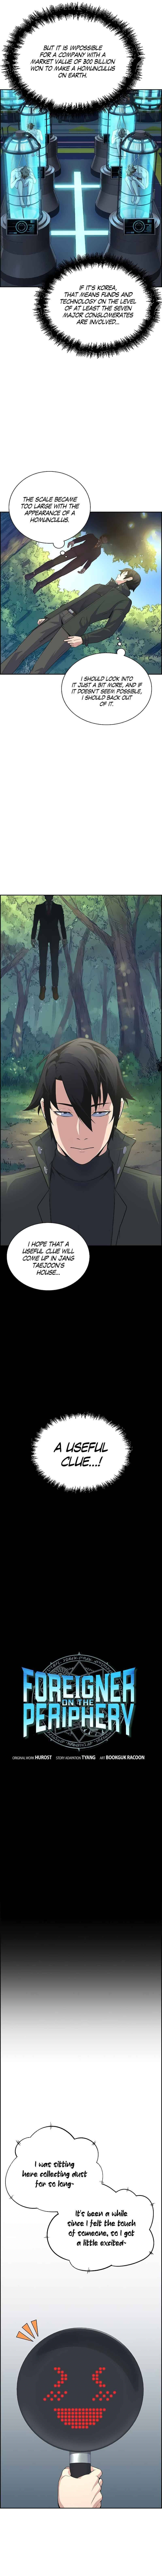 Foreigner on the Periphery Chapter 4 page 3 - MangaWeebs.in